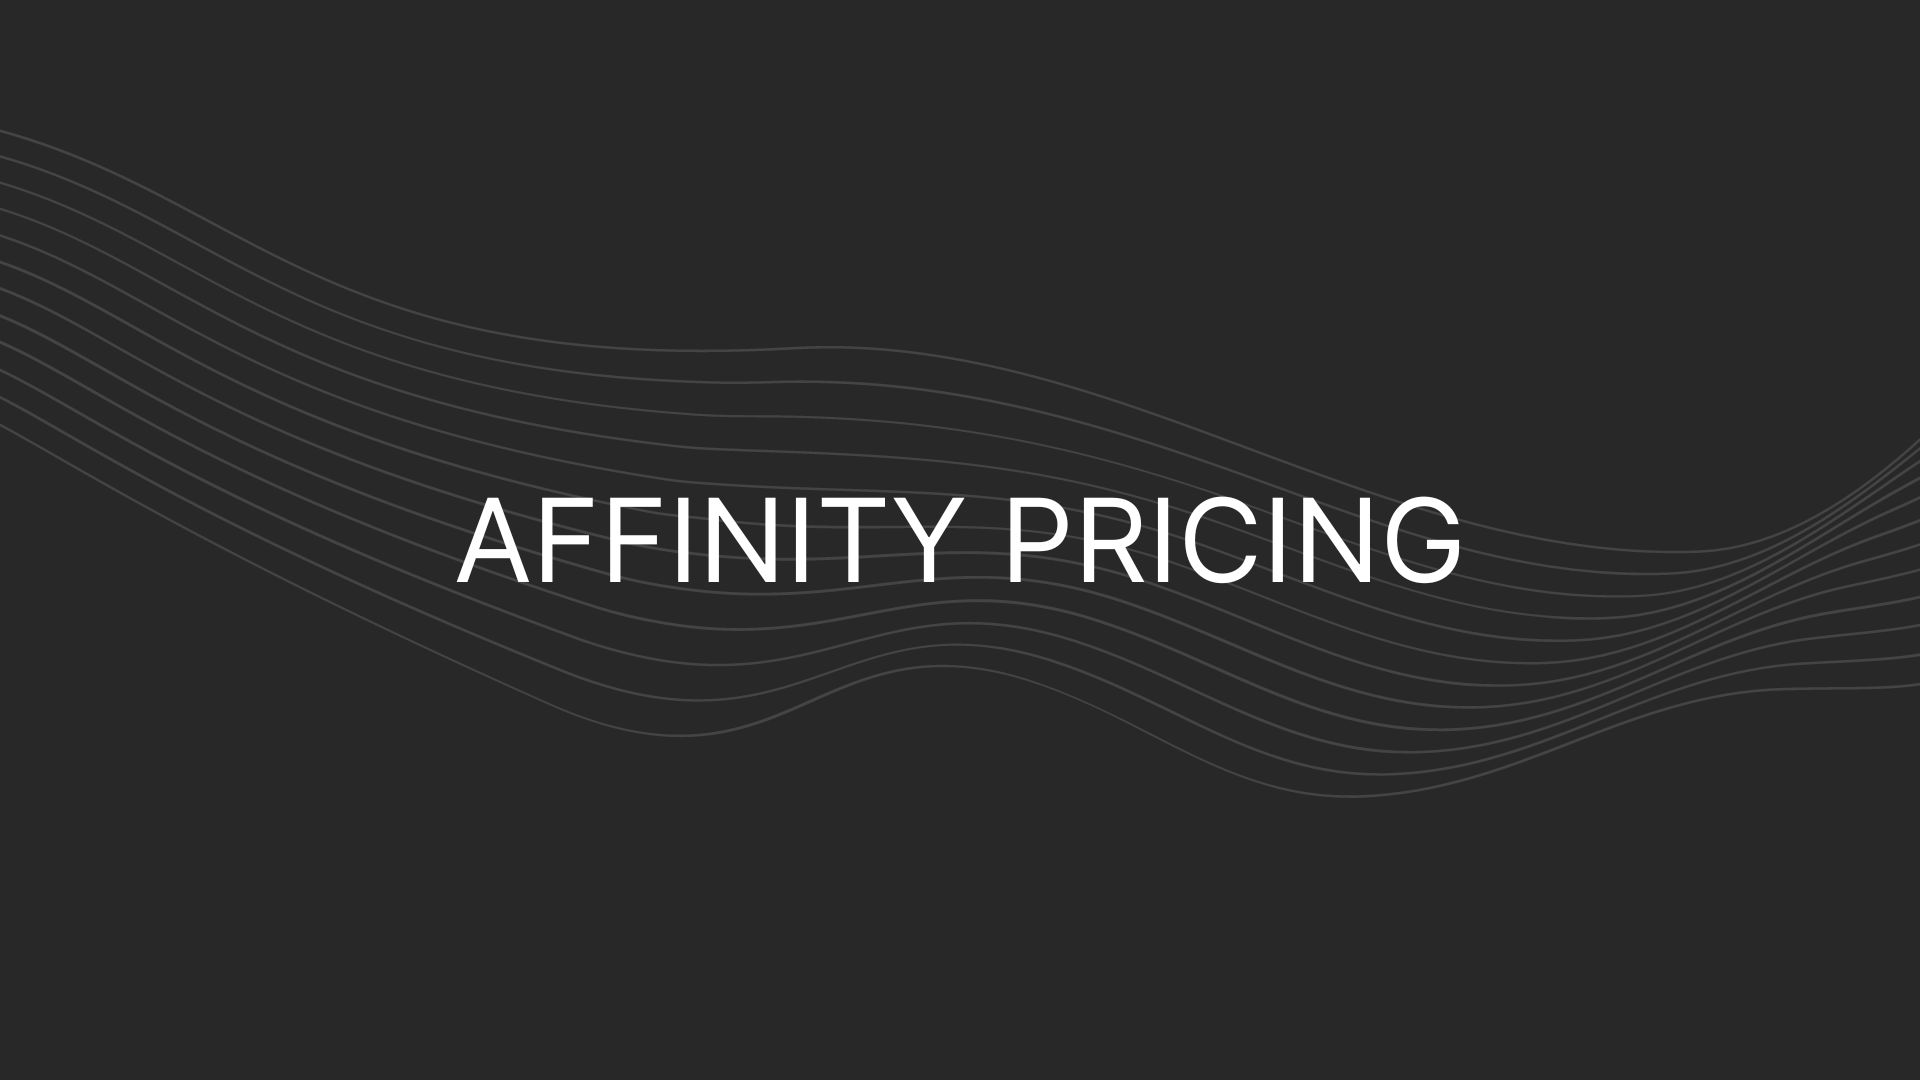 Affinity.co Pricing – Actual Prices To Understand Cost